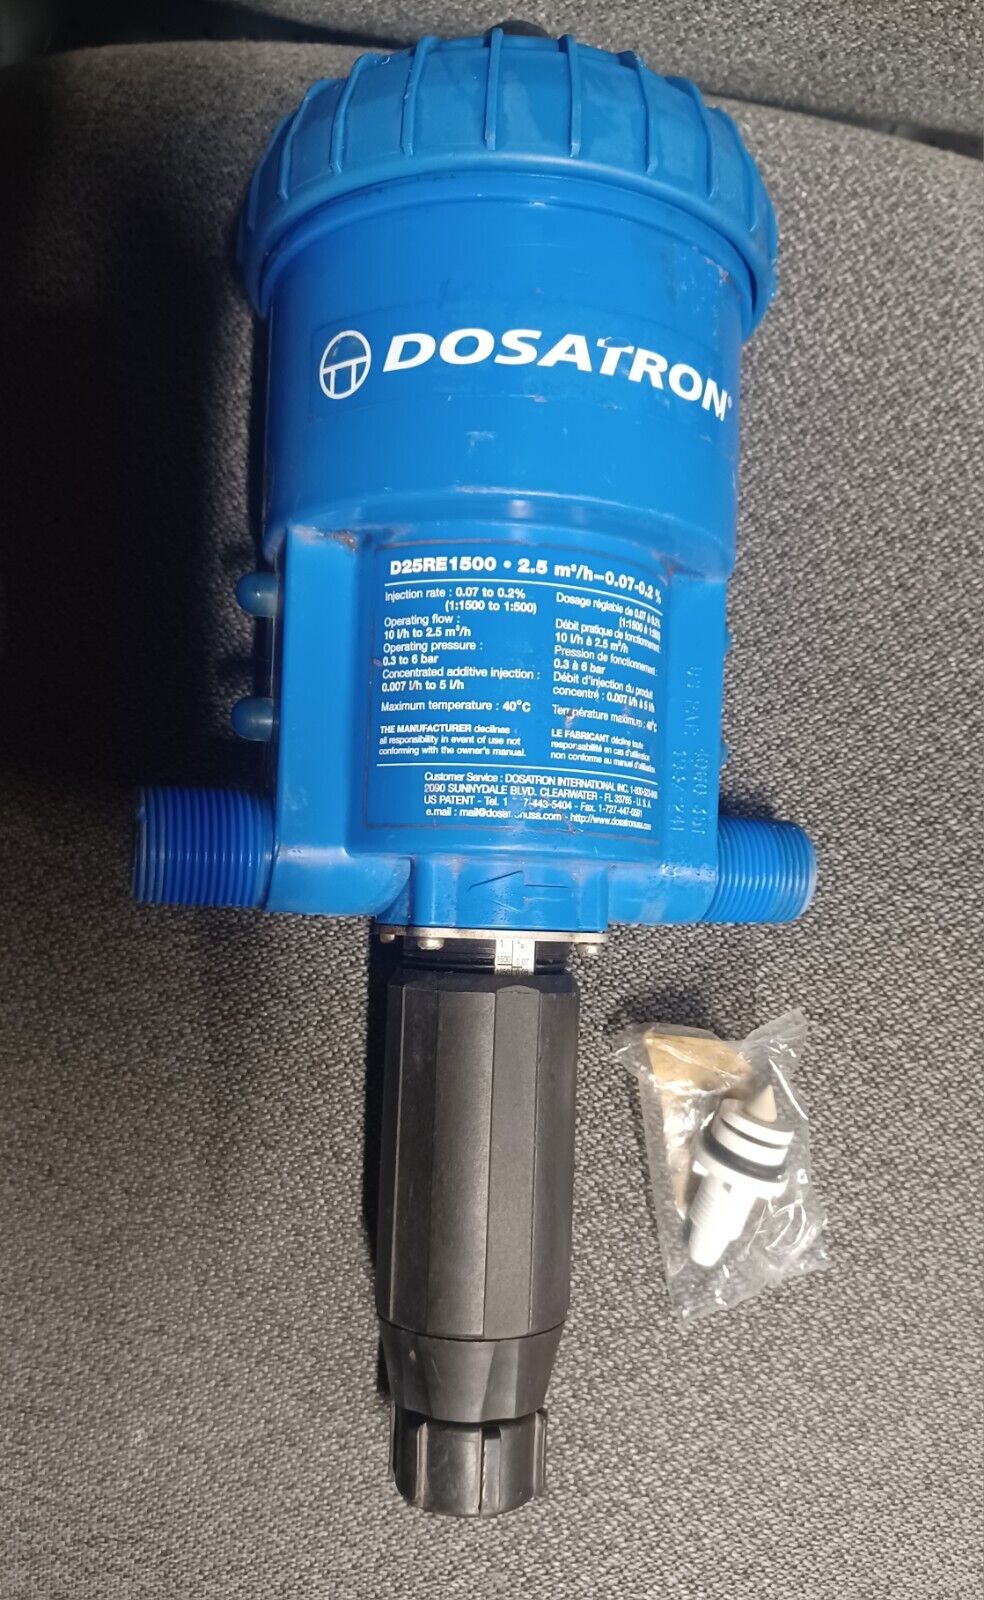 DOSATRON D25RE1500 Water Powered DOSER 11GPM 1:1500-1:500 With Bracket